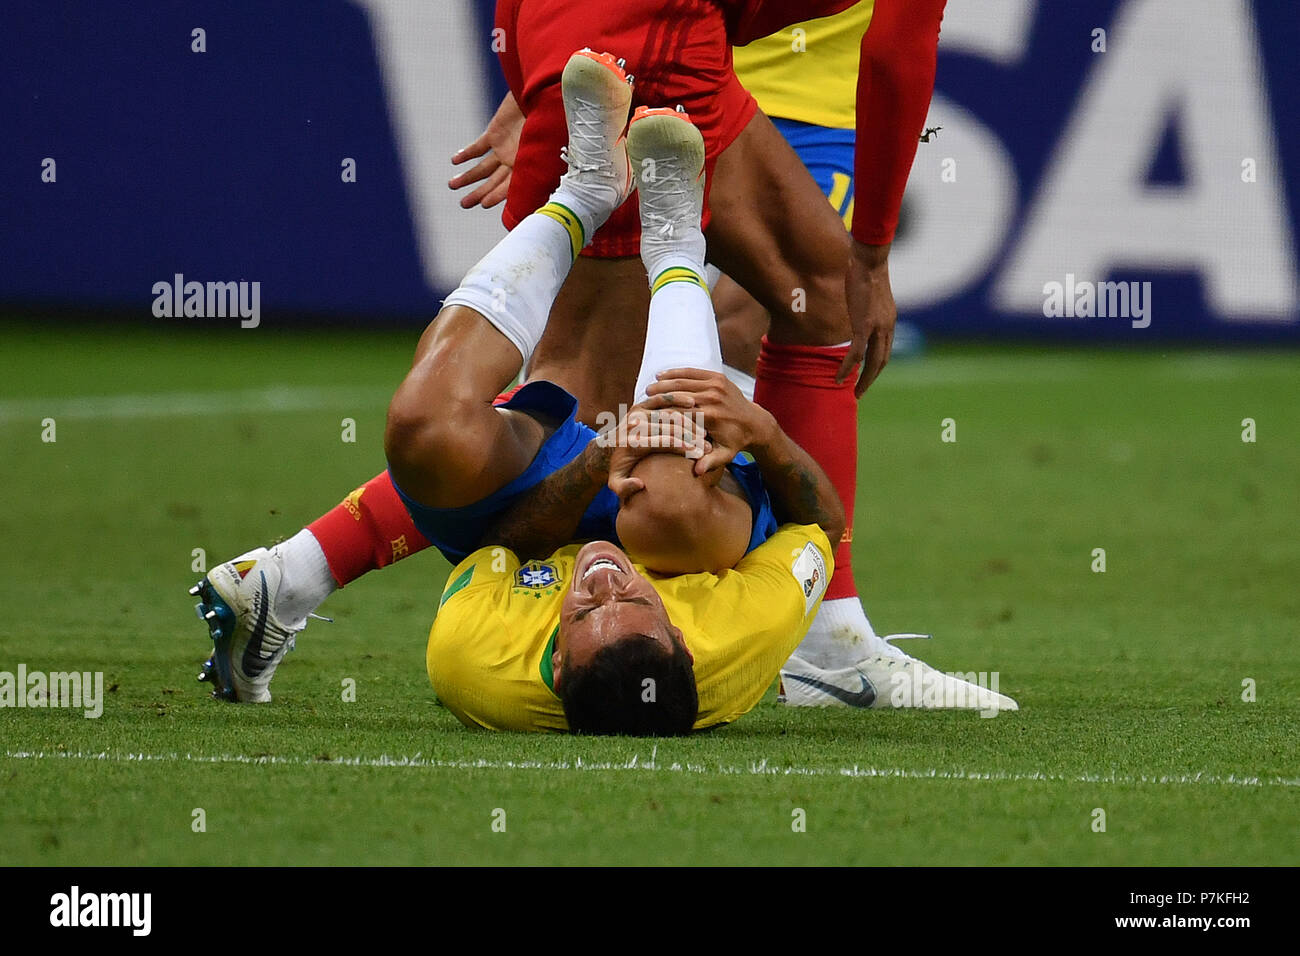 Kazan, Russia. 6th July 2018. Kazan, Russland. 06th July, 2018. PHILIPPE COUTINHO (BRA), at the ground, injured, injury, pain. Action. Brazil (BRA) - Belgium (BEL) 1-2, Quarter-Finals, Round of Eight, Game 58 on 06.07.2018 in Kazan, Kazan Arena. Football World Cup 2018 in Russia from 14.06. - 15.07.2018. | usage worldwide Credit: dpa/Alamy Live News Credit: dpa picture alliance/Alamy Live News Stock Photo